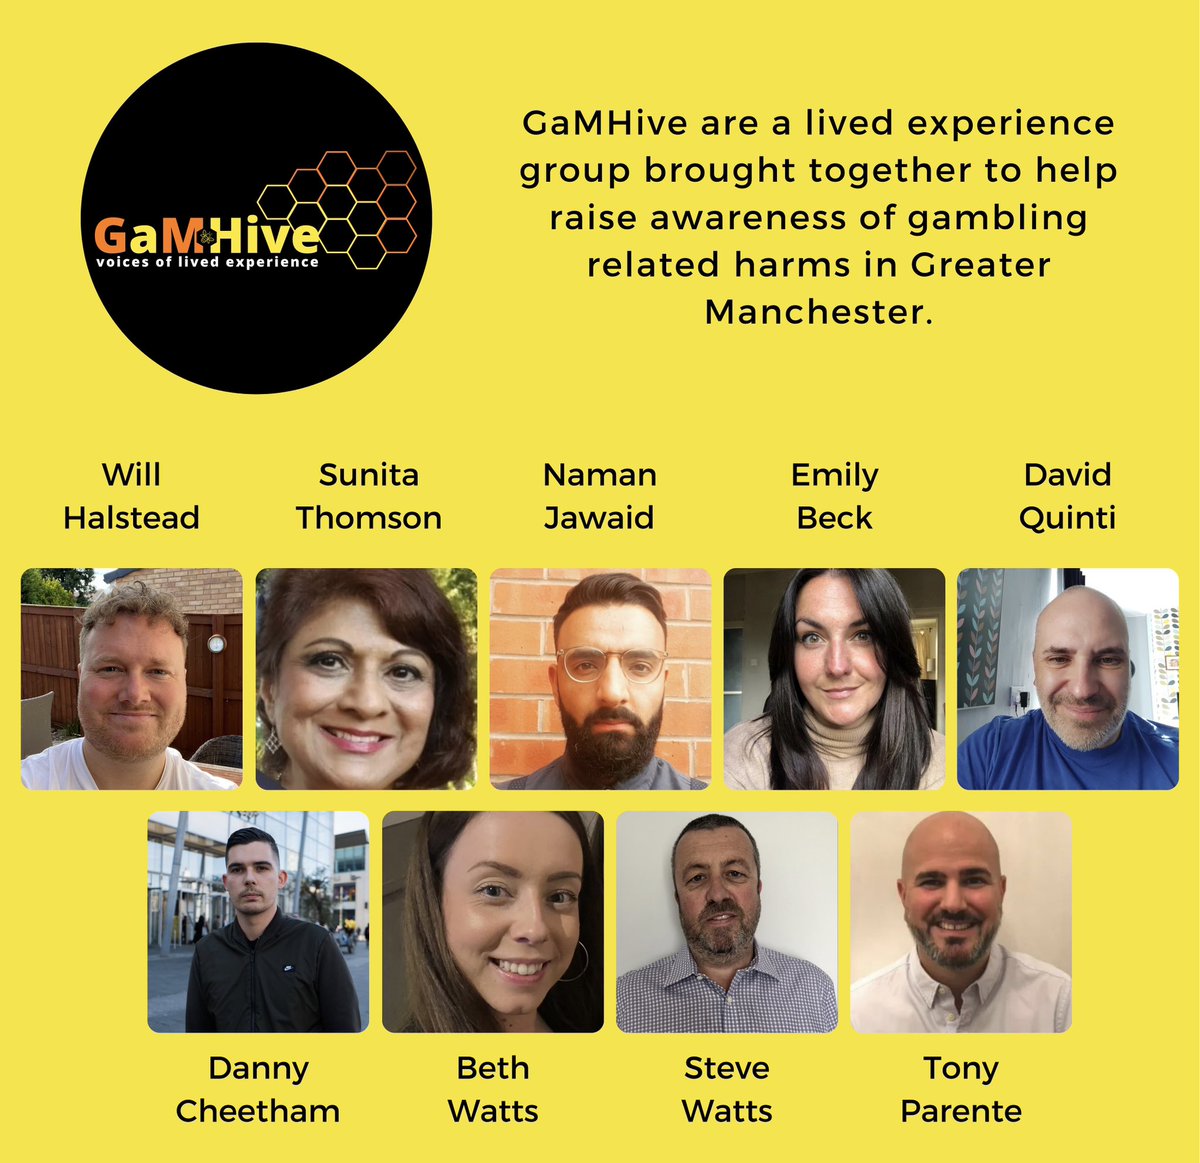 The GaMHive team are looking forward to seeing you in Manchester on 2nd August #livedexperience #gamblingharms #greatermanchester

eventbrite.com/e/mad-fer-it-a…